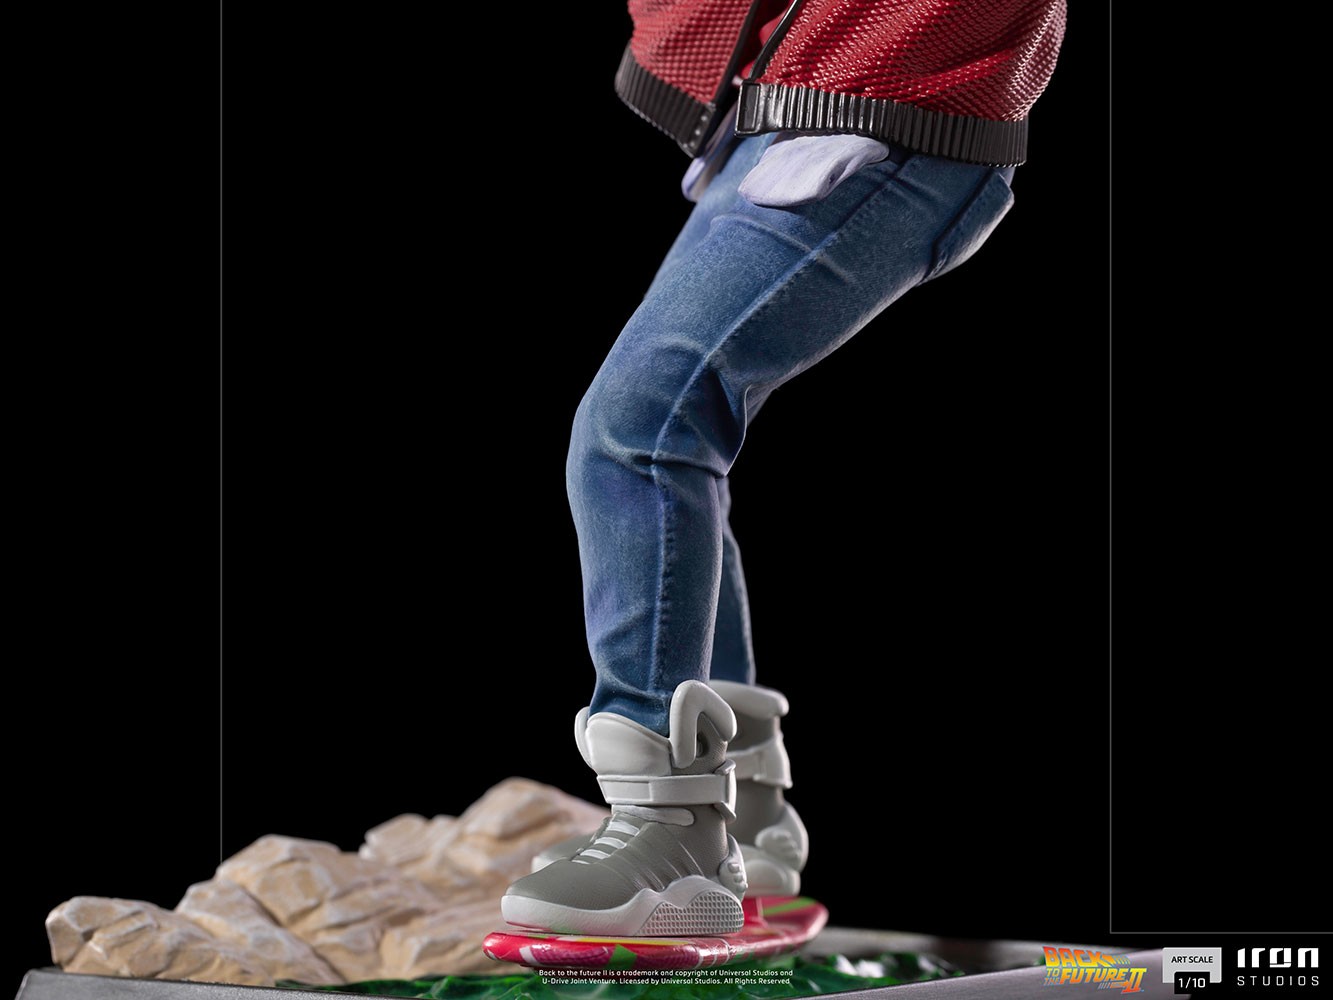 Marty McFly on Hoverboard